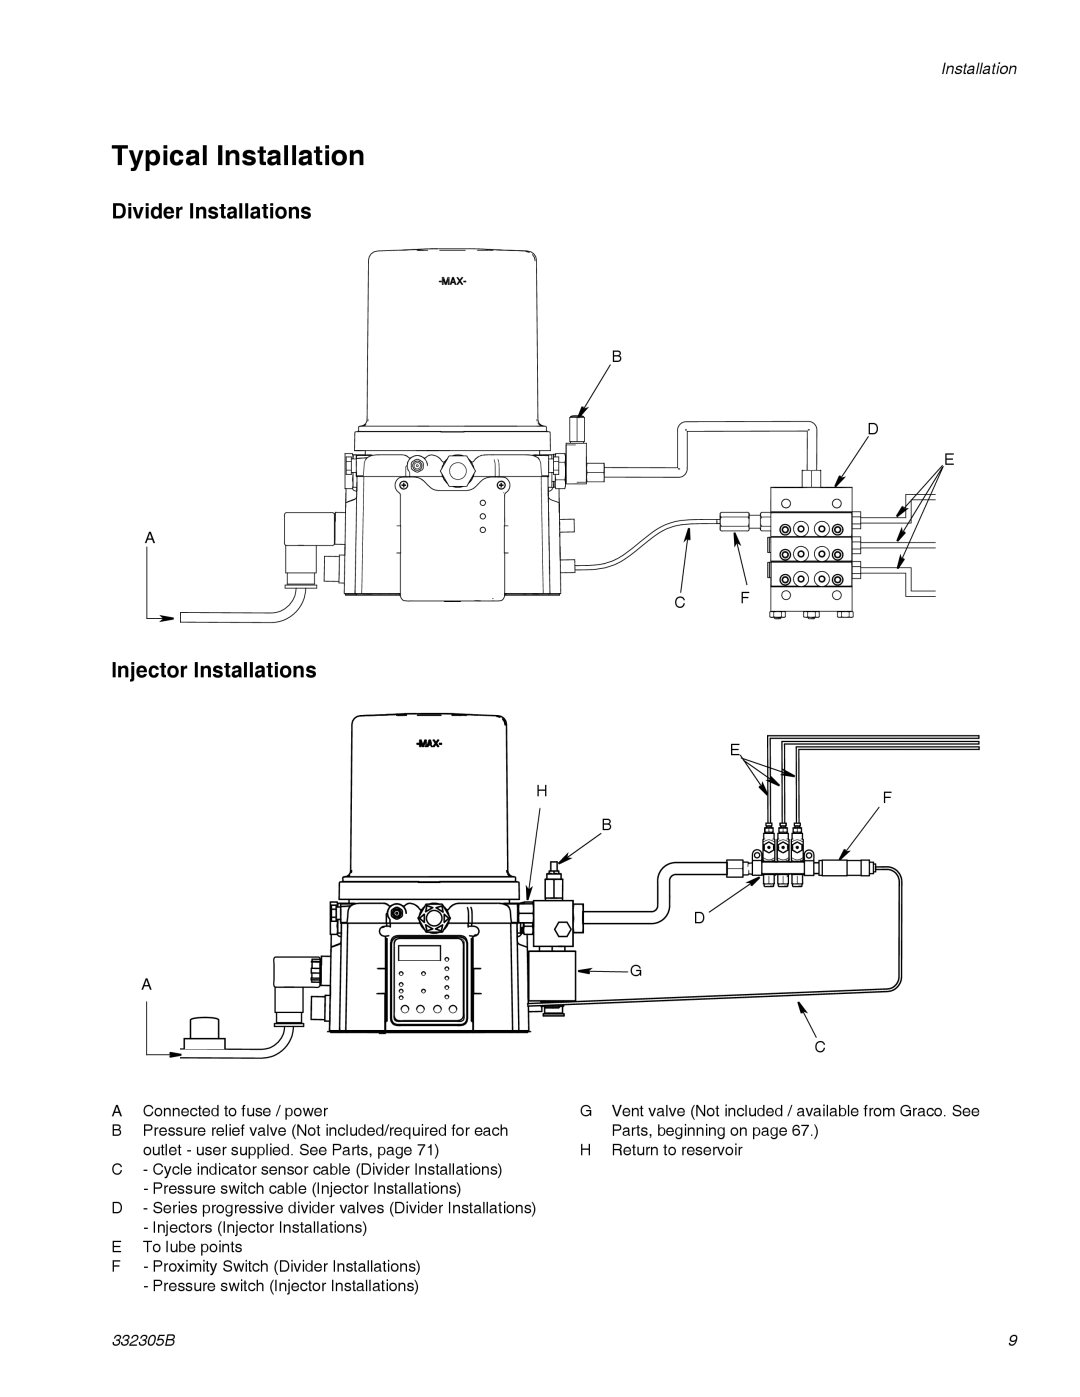 Graco 332305B important safety instructions Typical Installation, Divider Installations, Injector Installations 